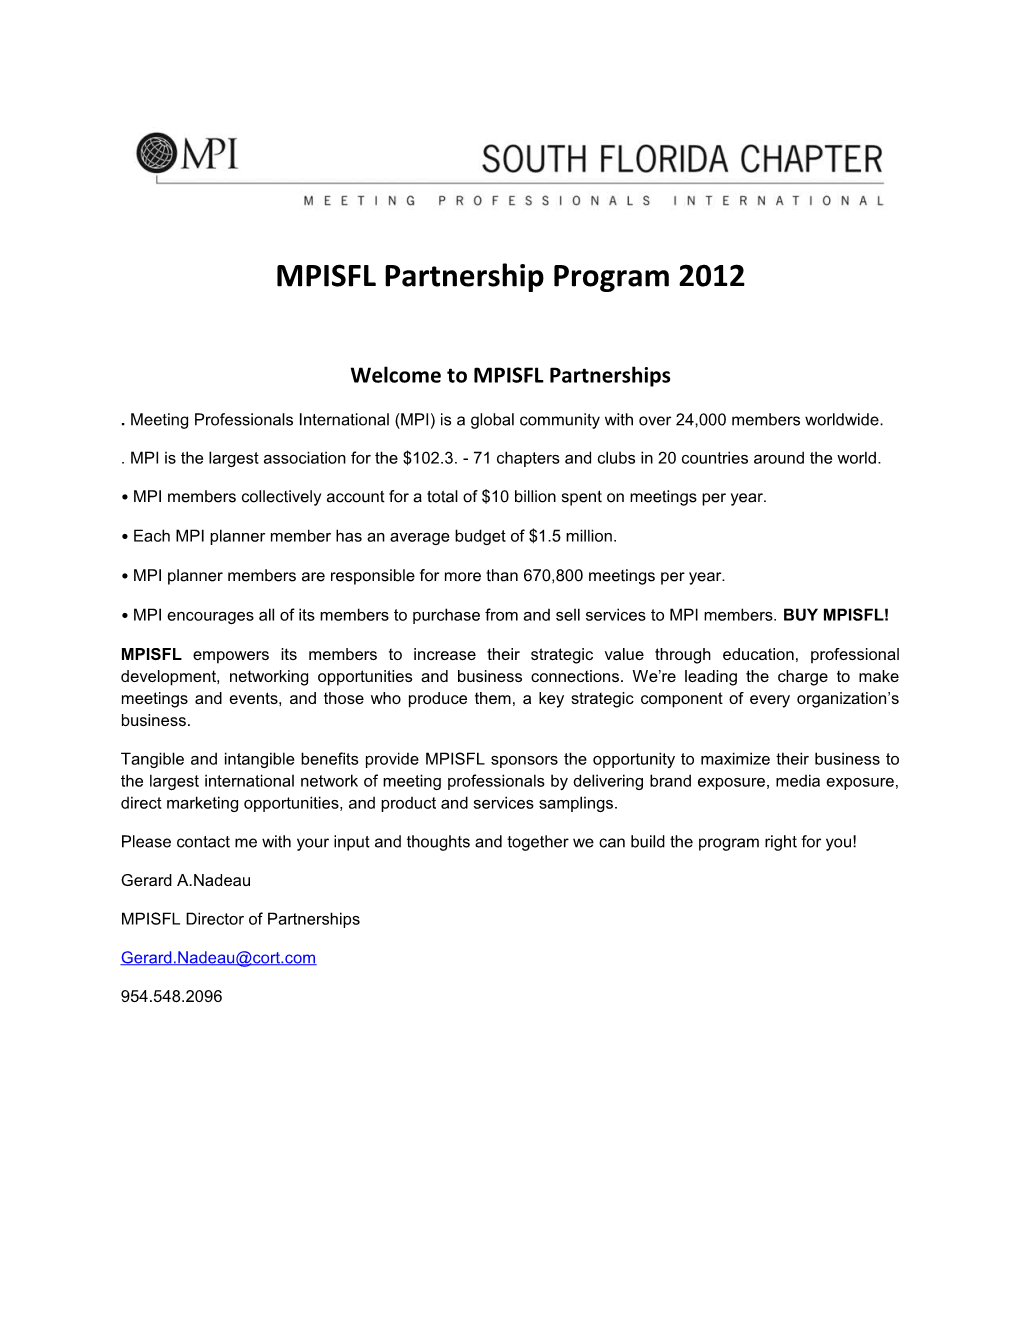 Welcome to MPISFL Partnerships